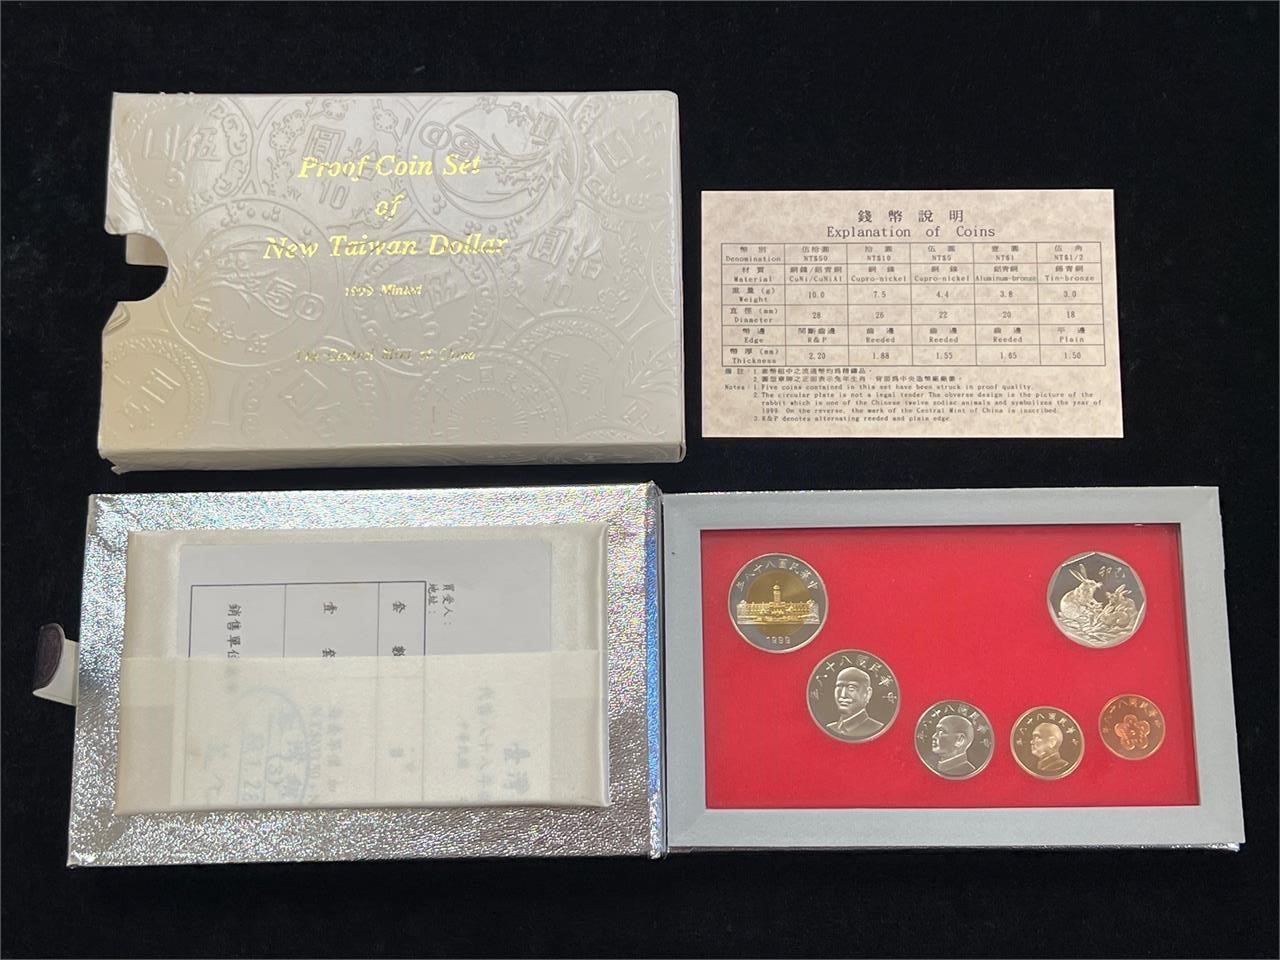 1999 Minted Proof Coin Set of New Taiwan Dollar